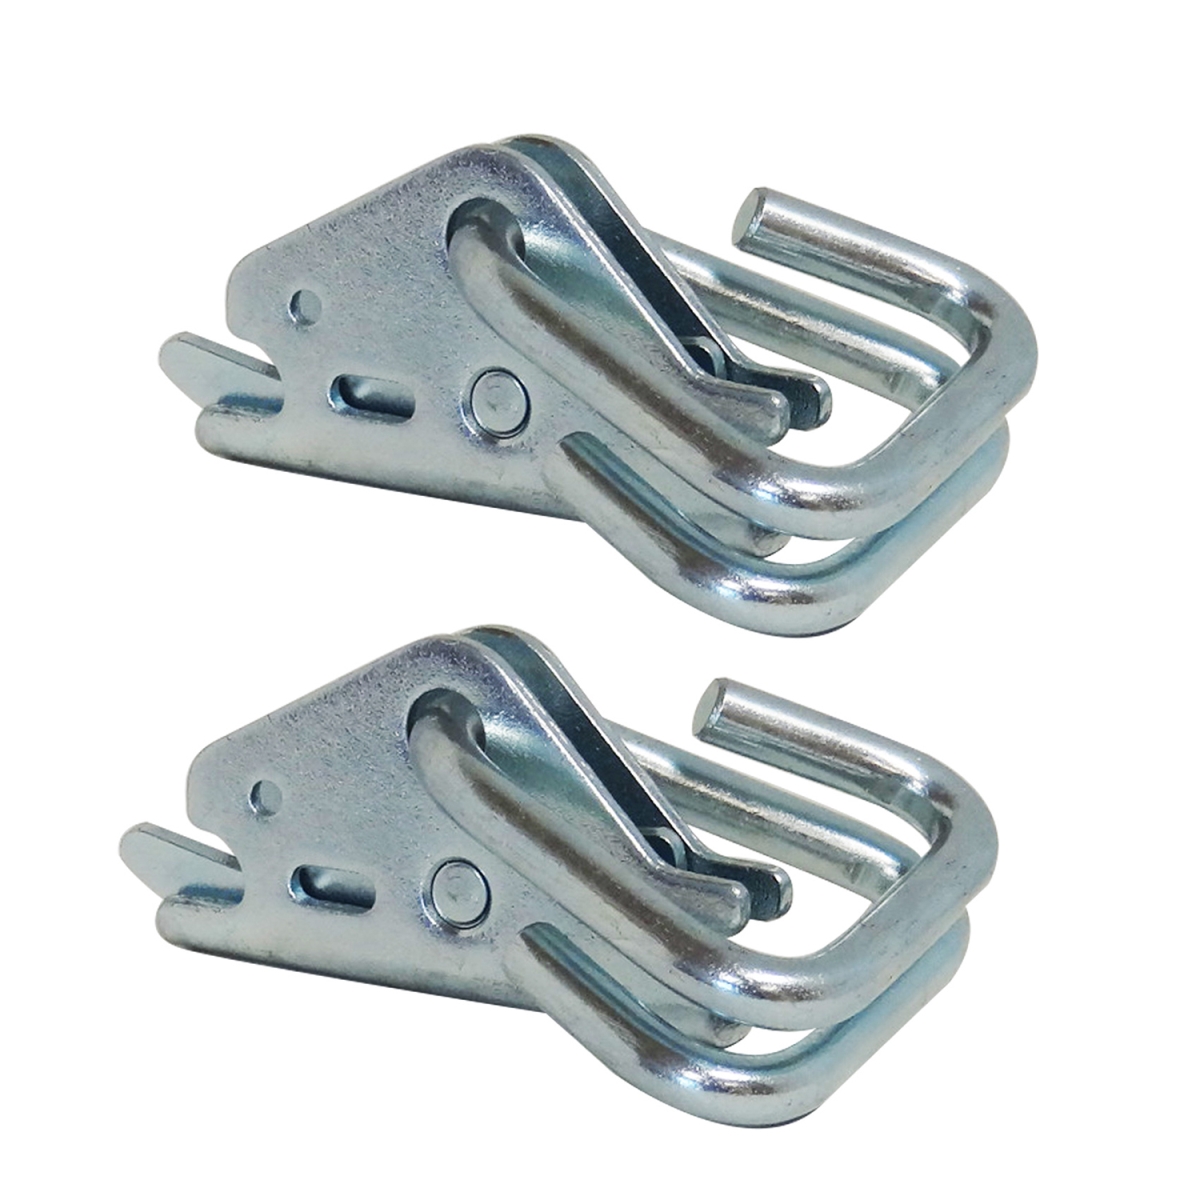 3,000 Lbs Hook-ring Adapter, Slips Into Ends Of Hook Straps For Easy No Threading Connection To E-track - Zinc Plated, Pack Of 2